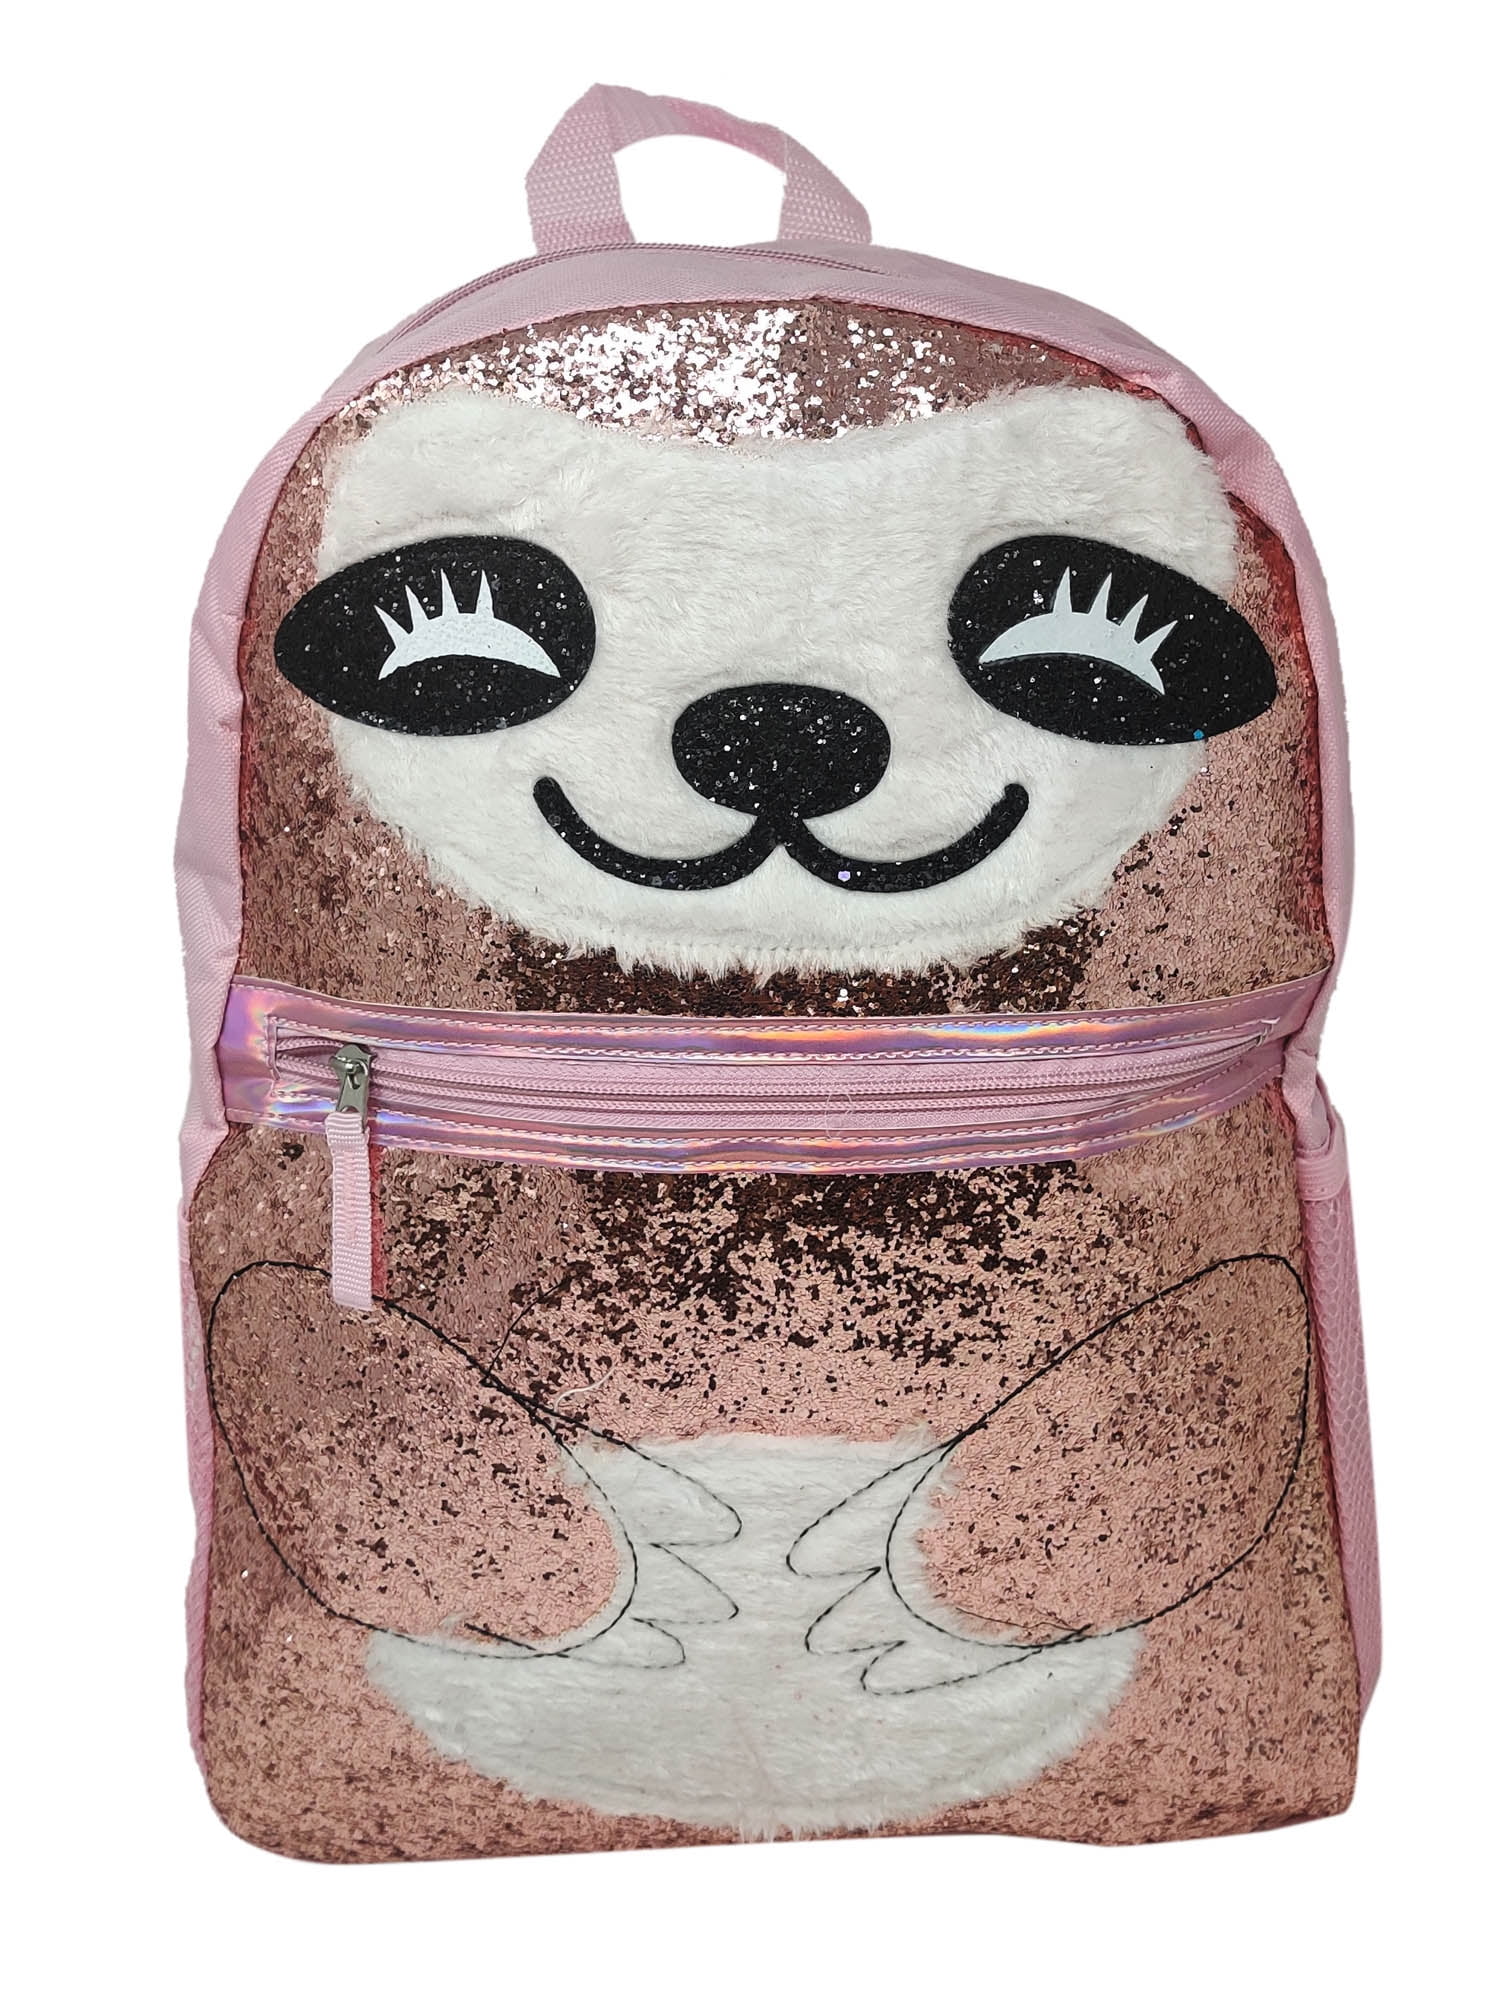 Laptop Backpack Boys Grils Space Sloth School Bookbags Computer Daypack for Travel Hiking Camping 